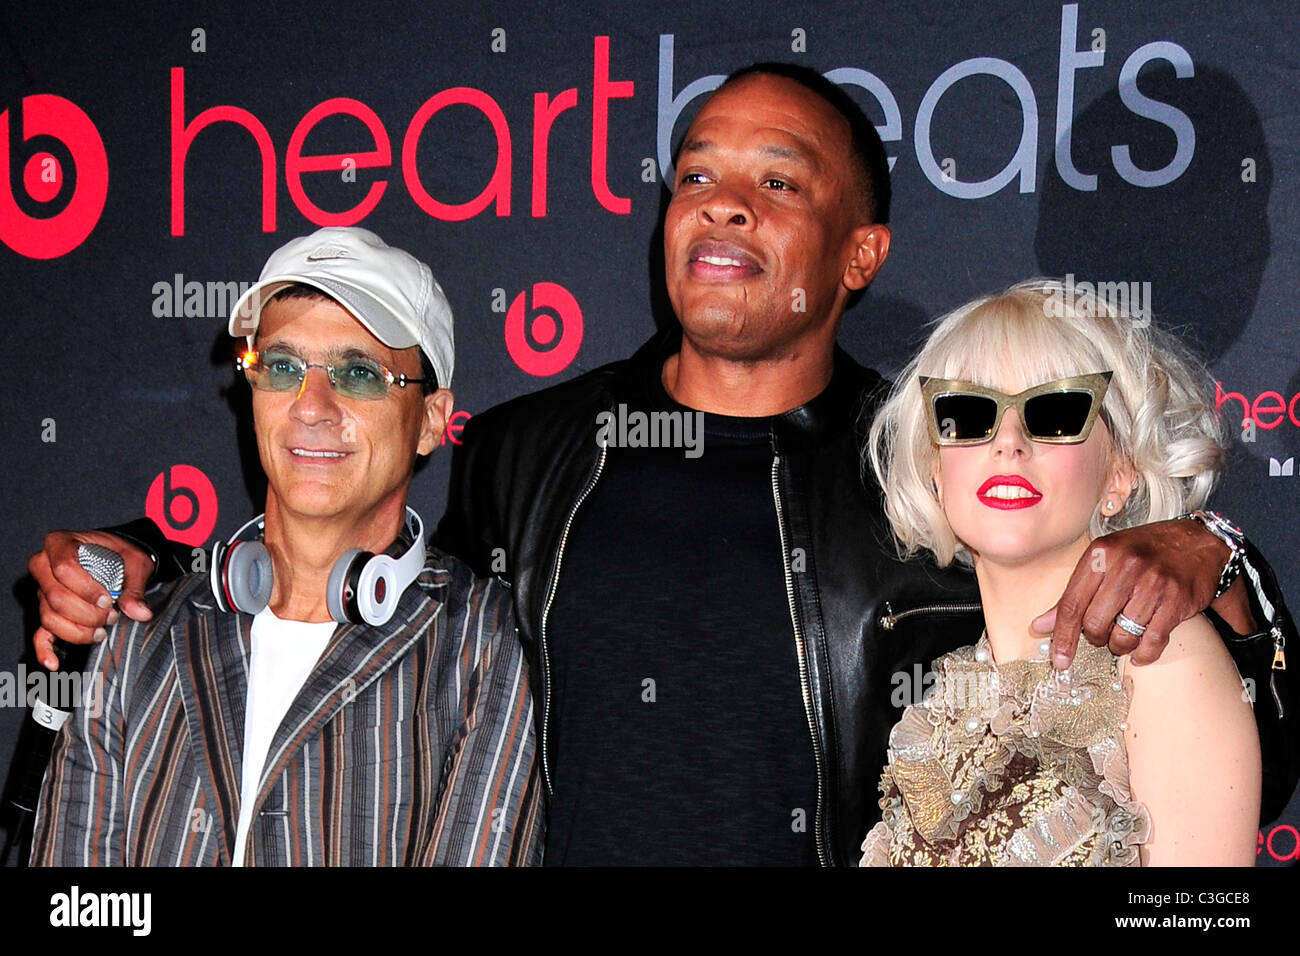 Jimmy Iovine, Dr. Dre and Lady Gaga U.S. Launch of Heartbeats by Lady Gaga from Monster New York City, USA - 30.09.09 Patricia Stock Photo